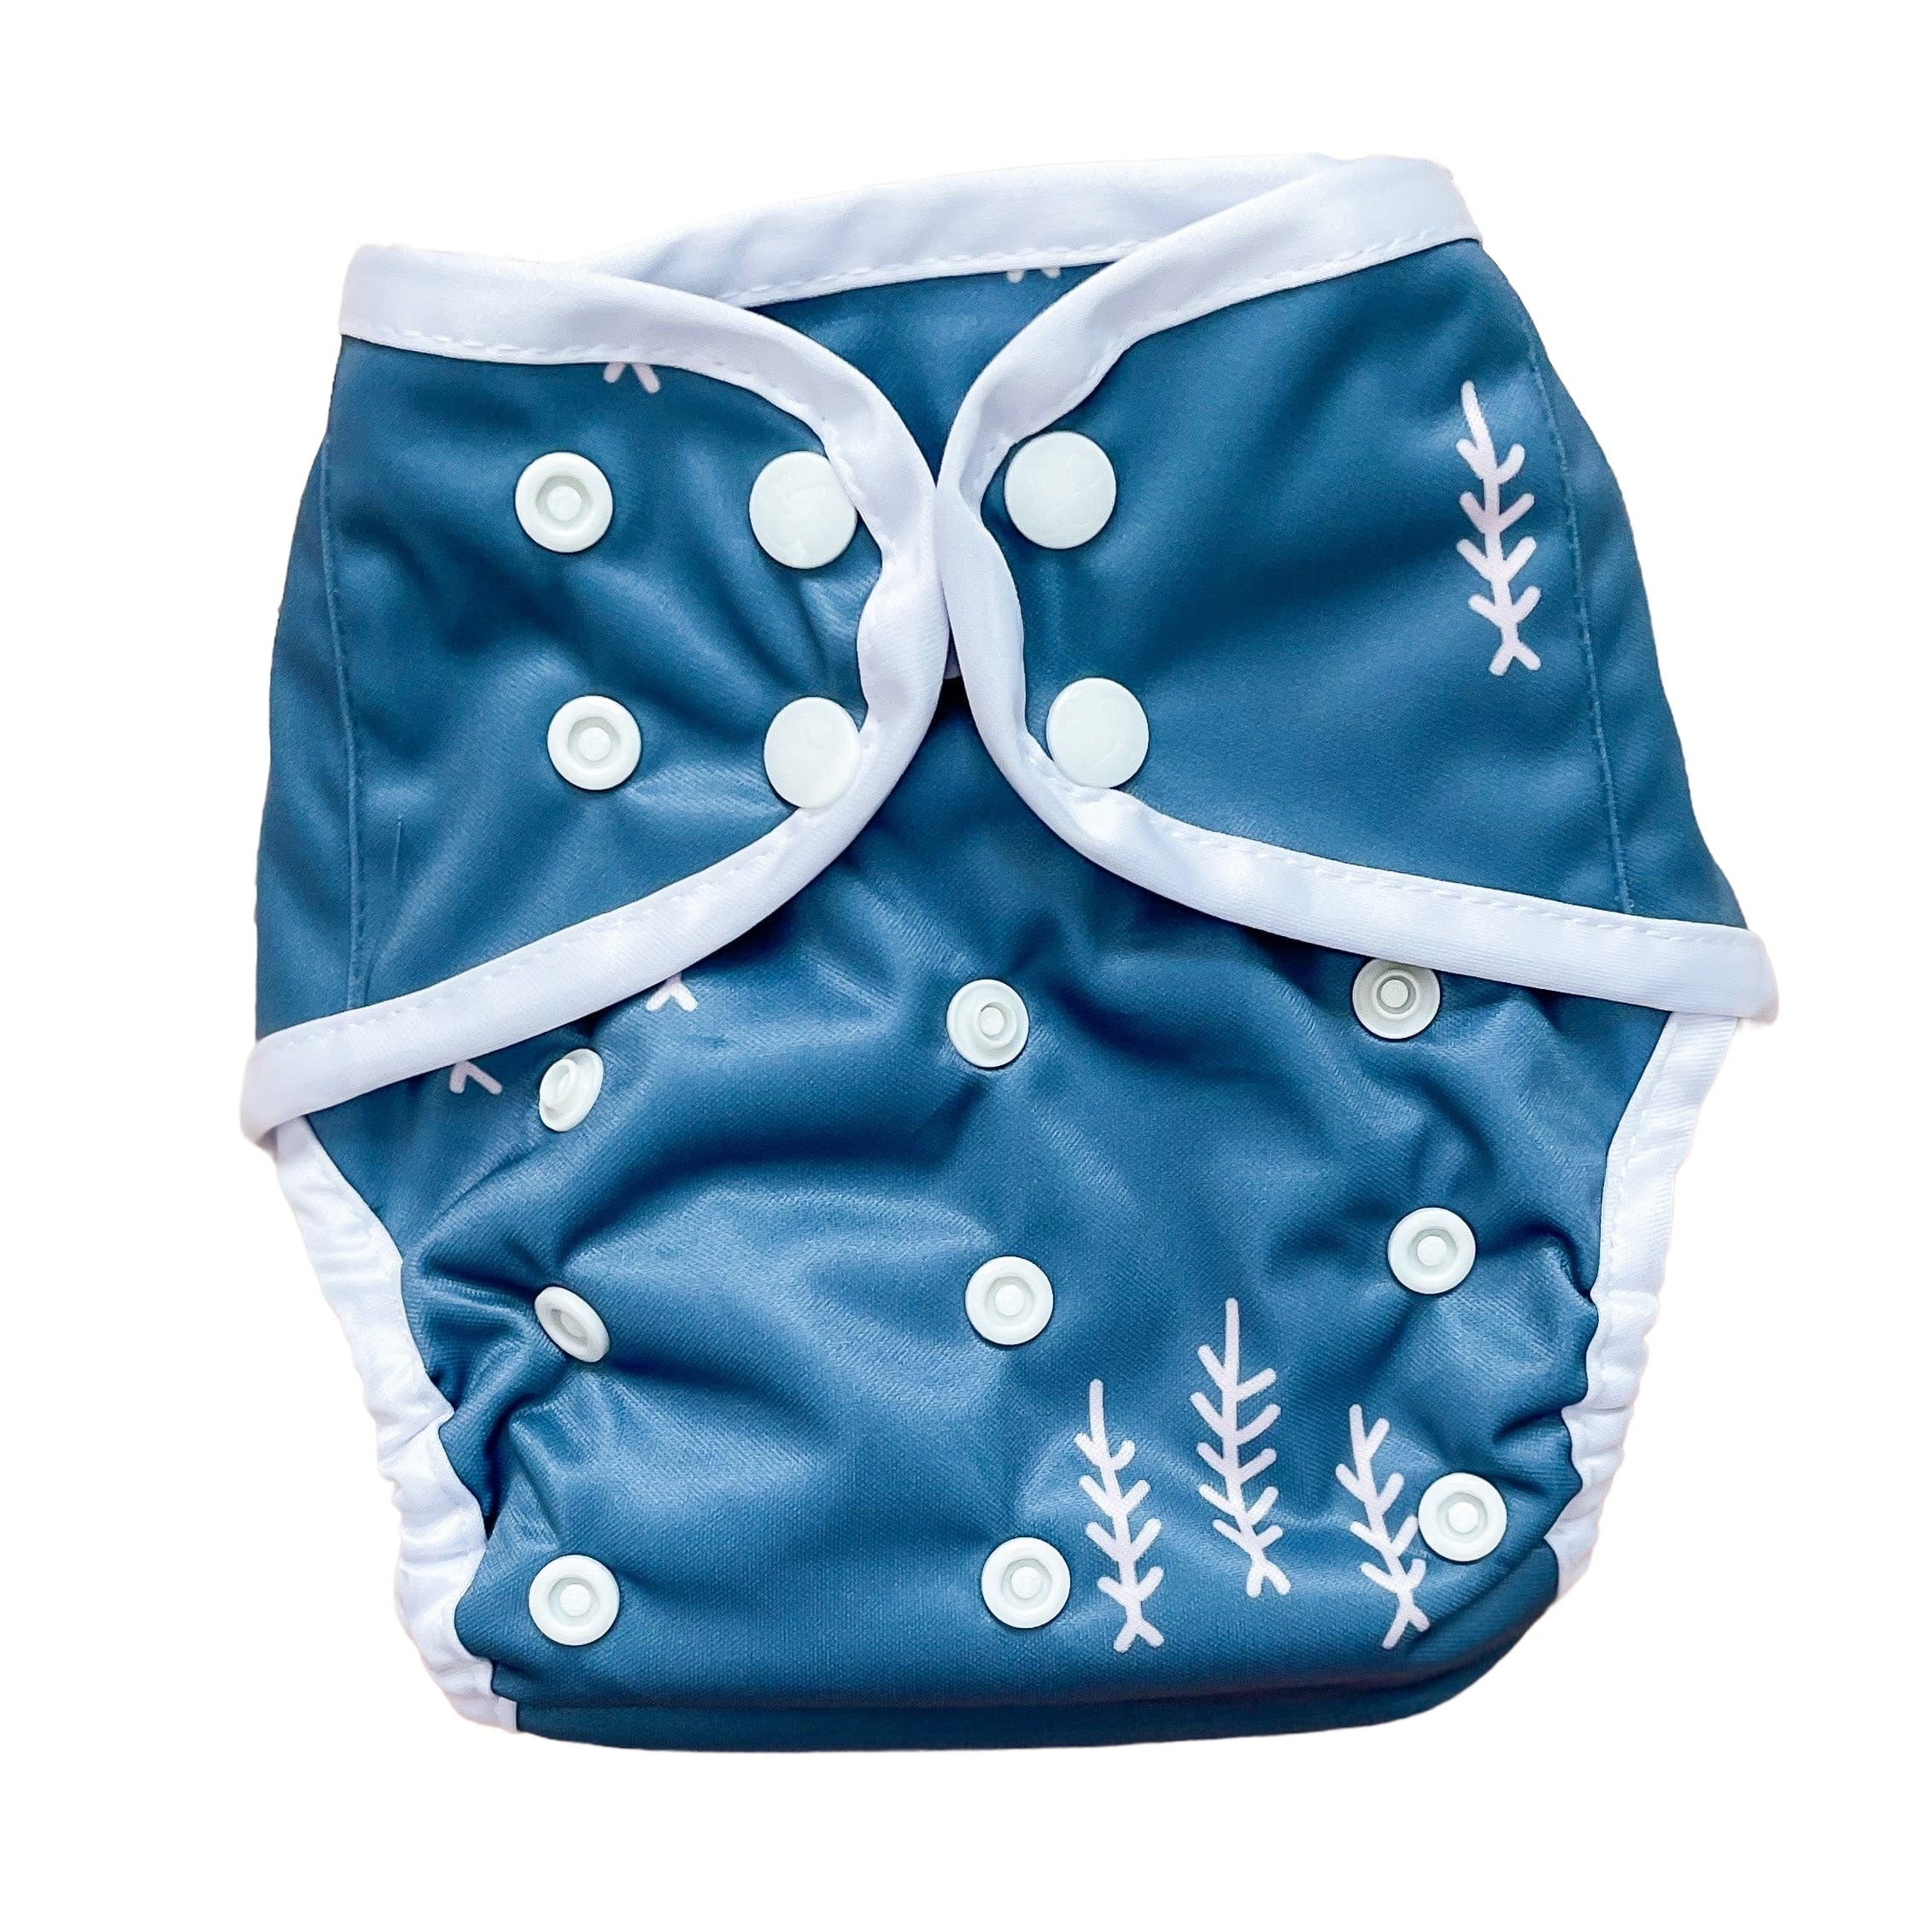 The "bally" One Size Diaper Cover By Happy Beehinds - Prints